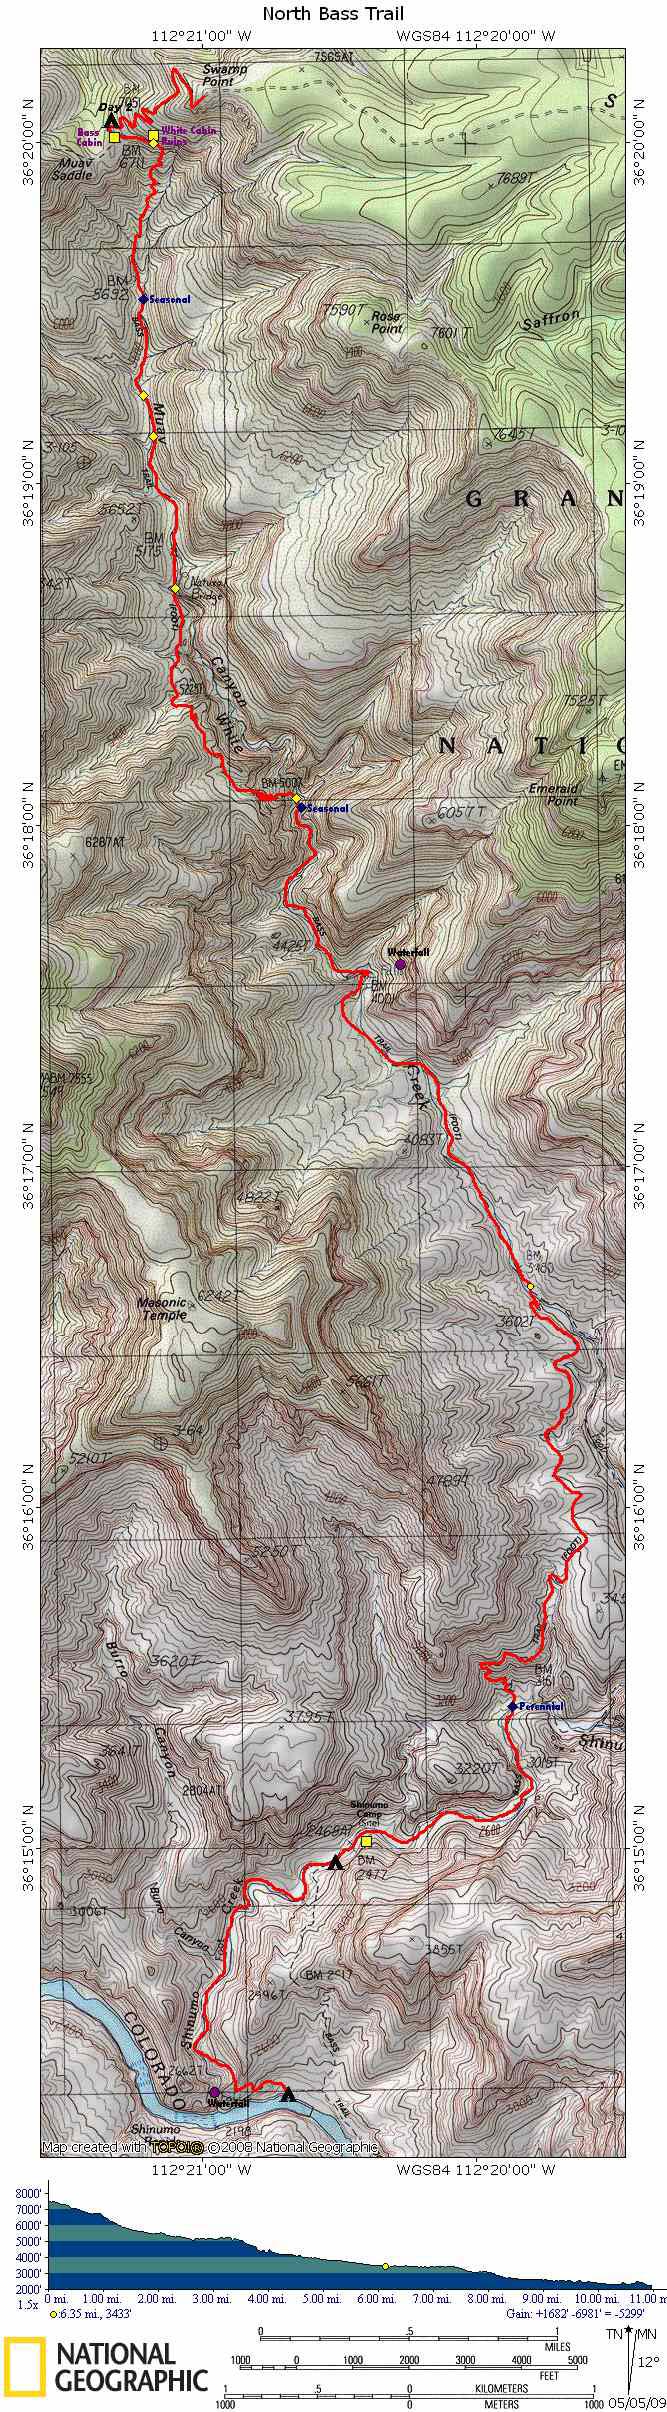 Map of North Bass Trail with Elevation Profile